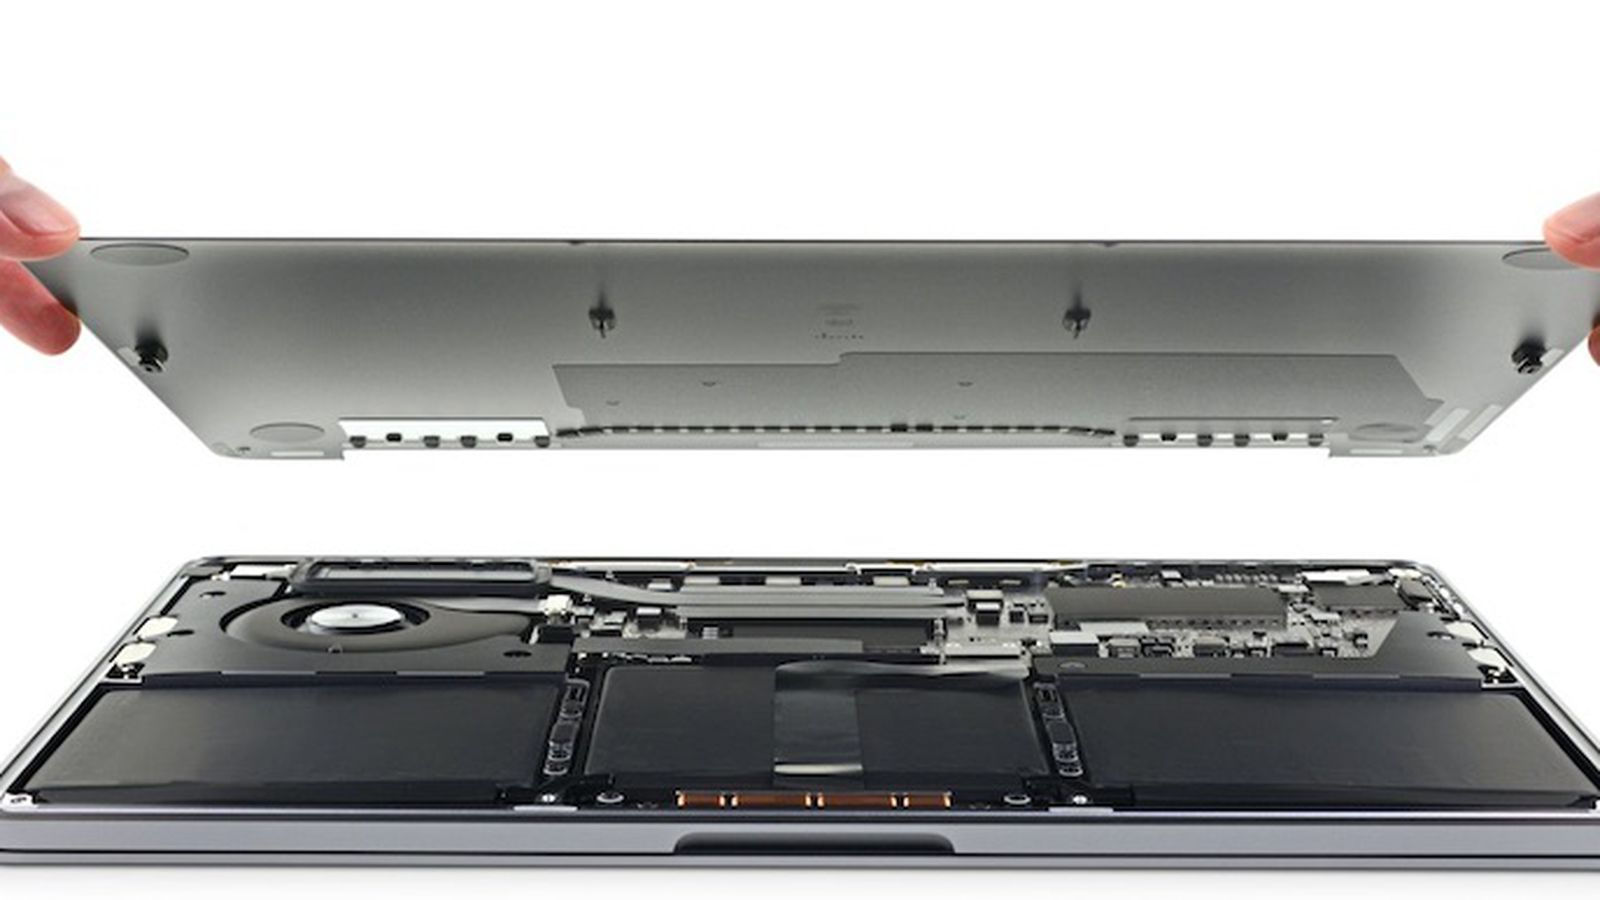 Base 2019 13-Inch MacBook Pro Reveals Larger Battery, Soldered-Down and Updated Keyboard Material - MacRumors